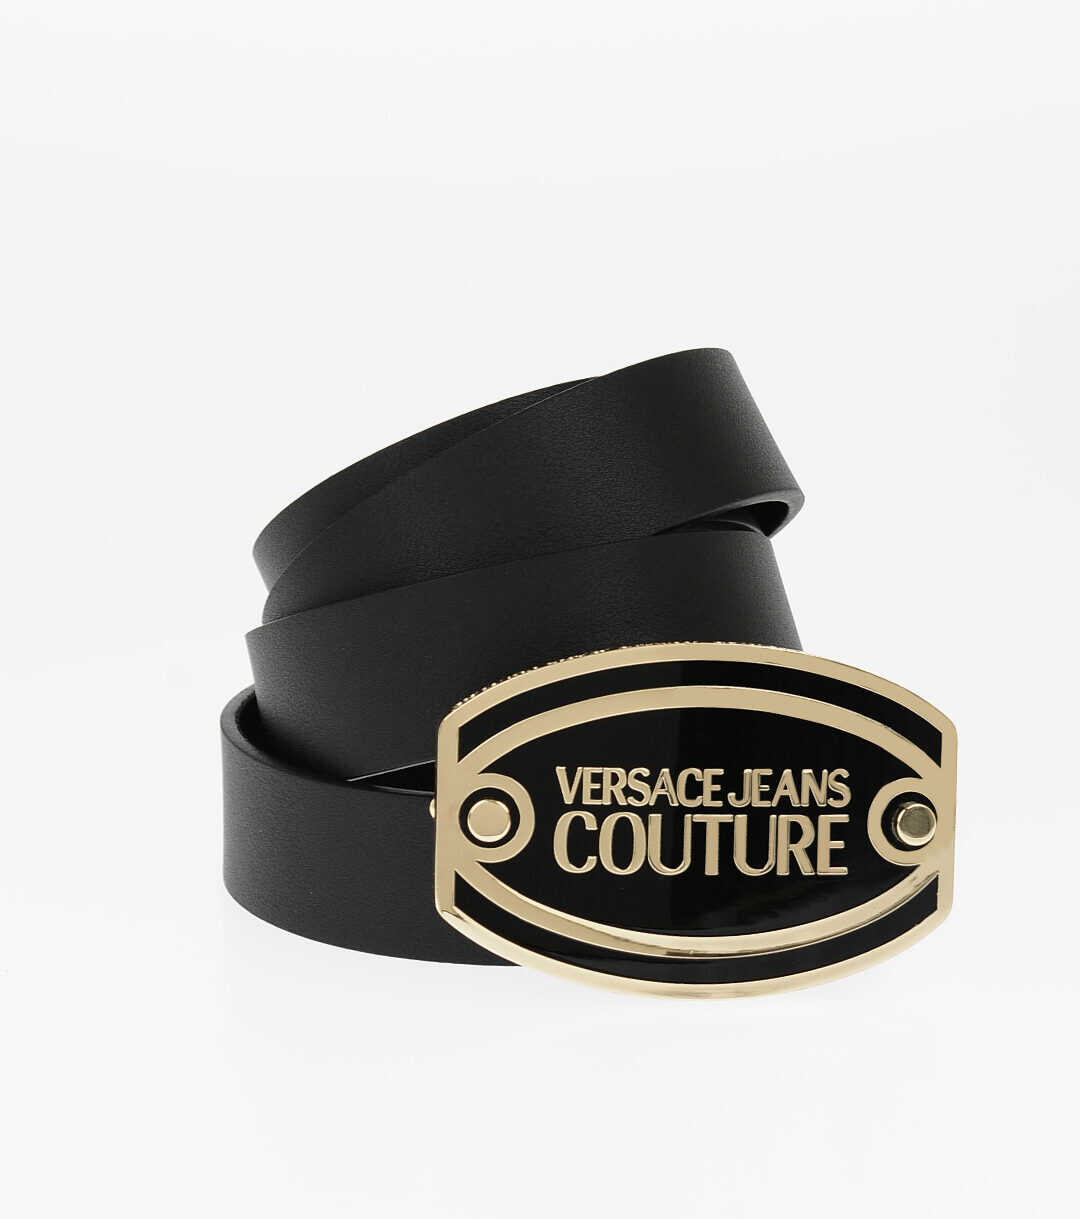 Versace Jeans Couture Leather Belt With Maxi Logoed Buckle 30Mm Black